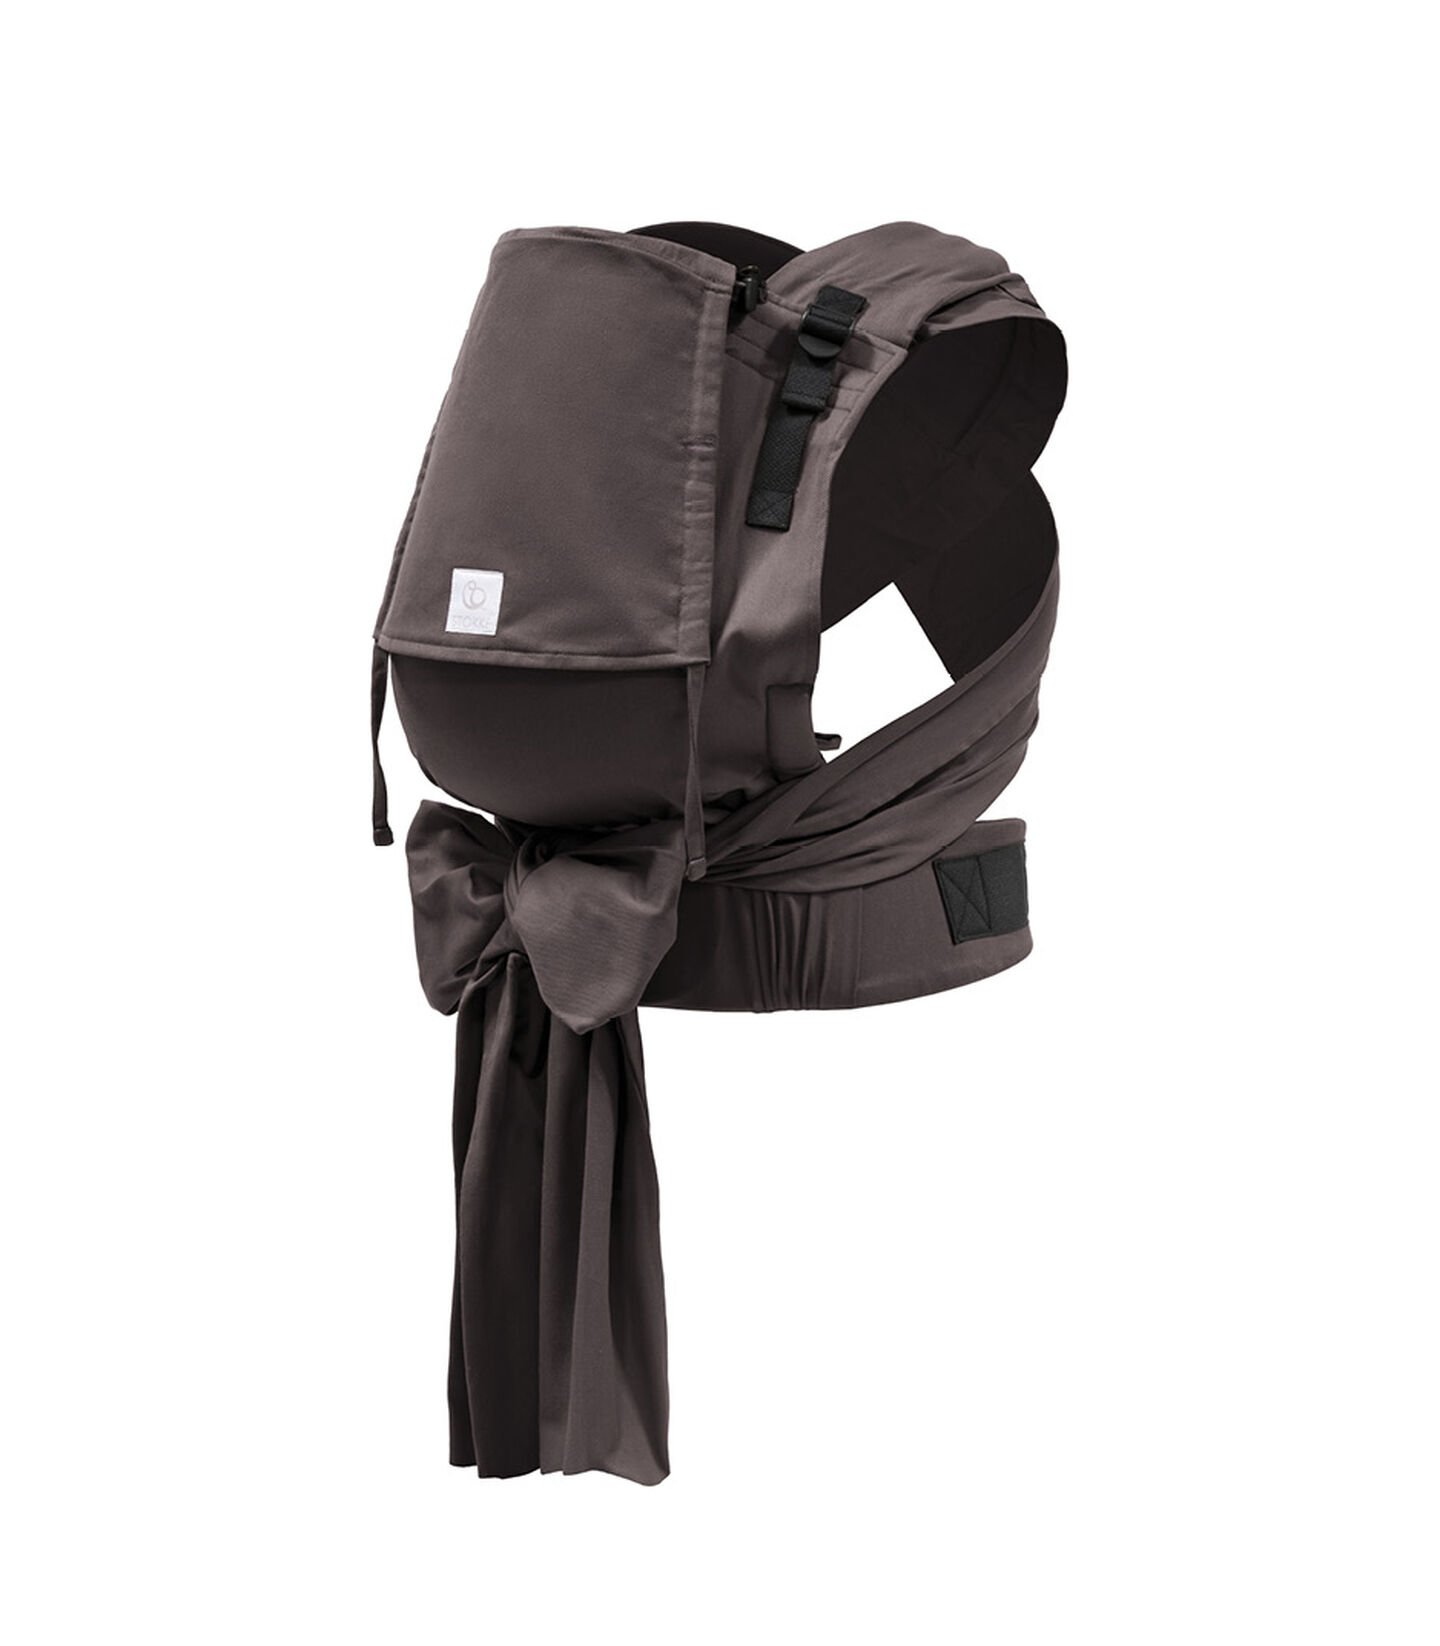 Stokke® Limas™ babydrager Plus Dark Anthracite, Espresso Brown, mainview view 1